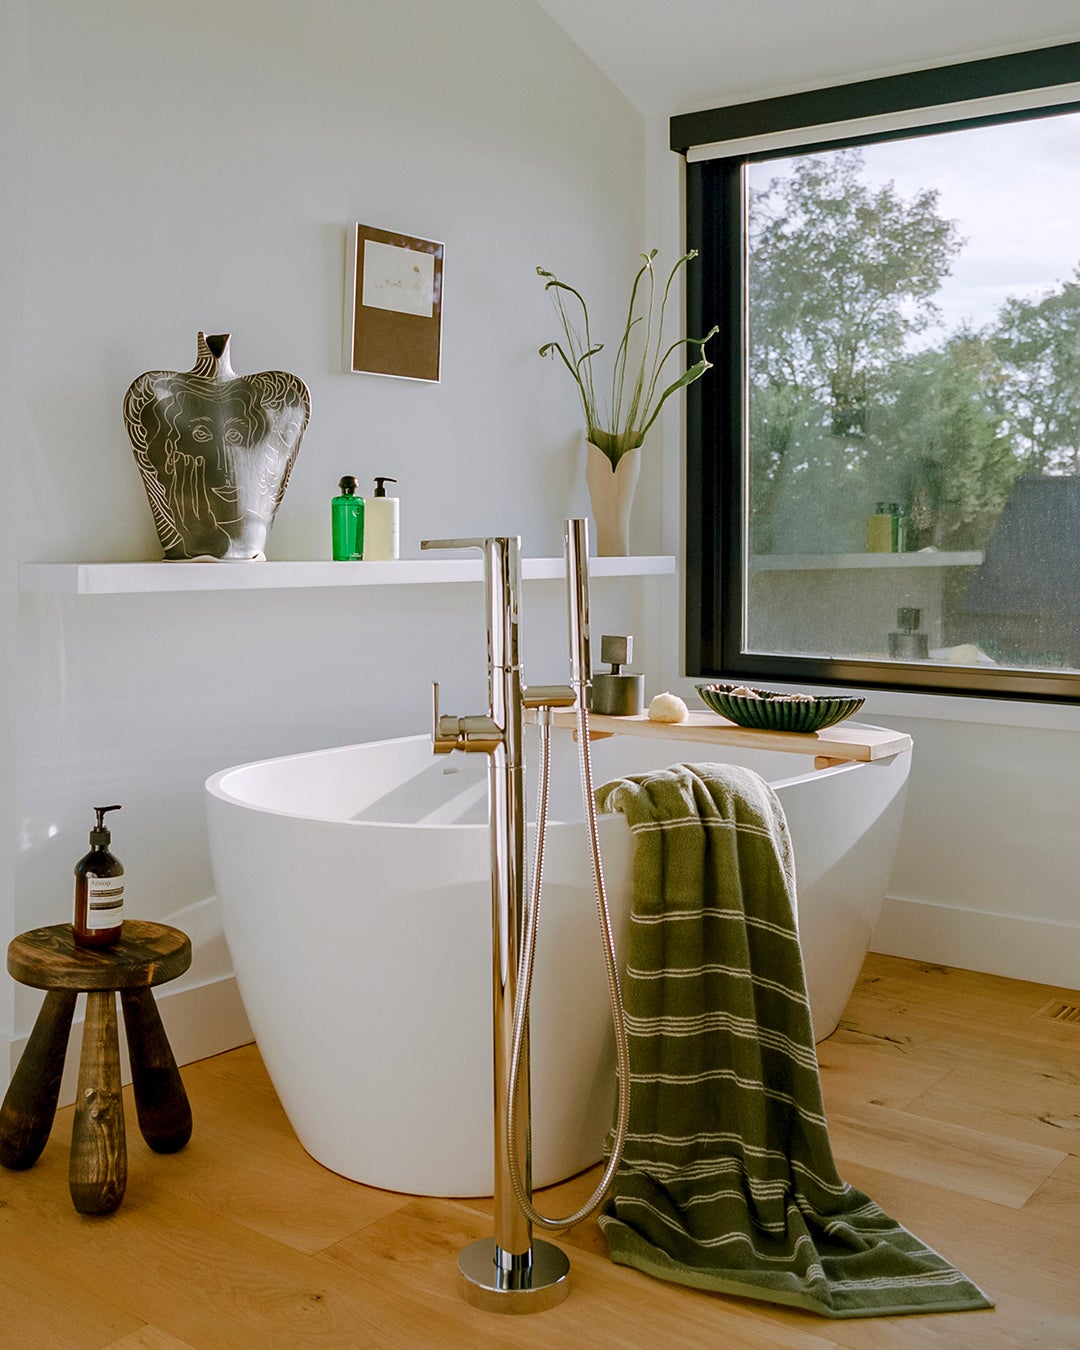 Egg-shaped bathtub with green striped towel hanging over